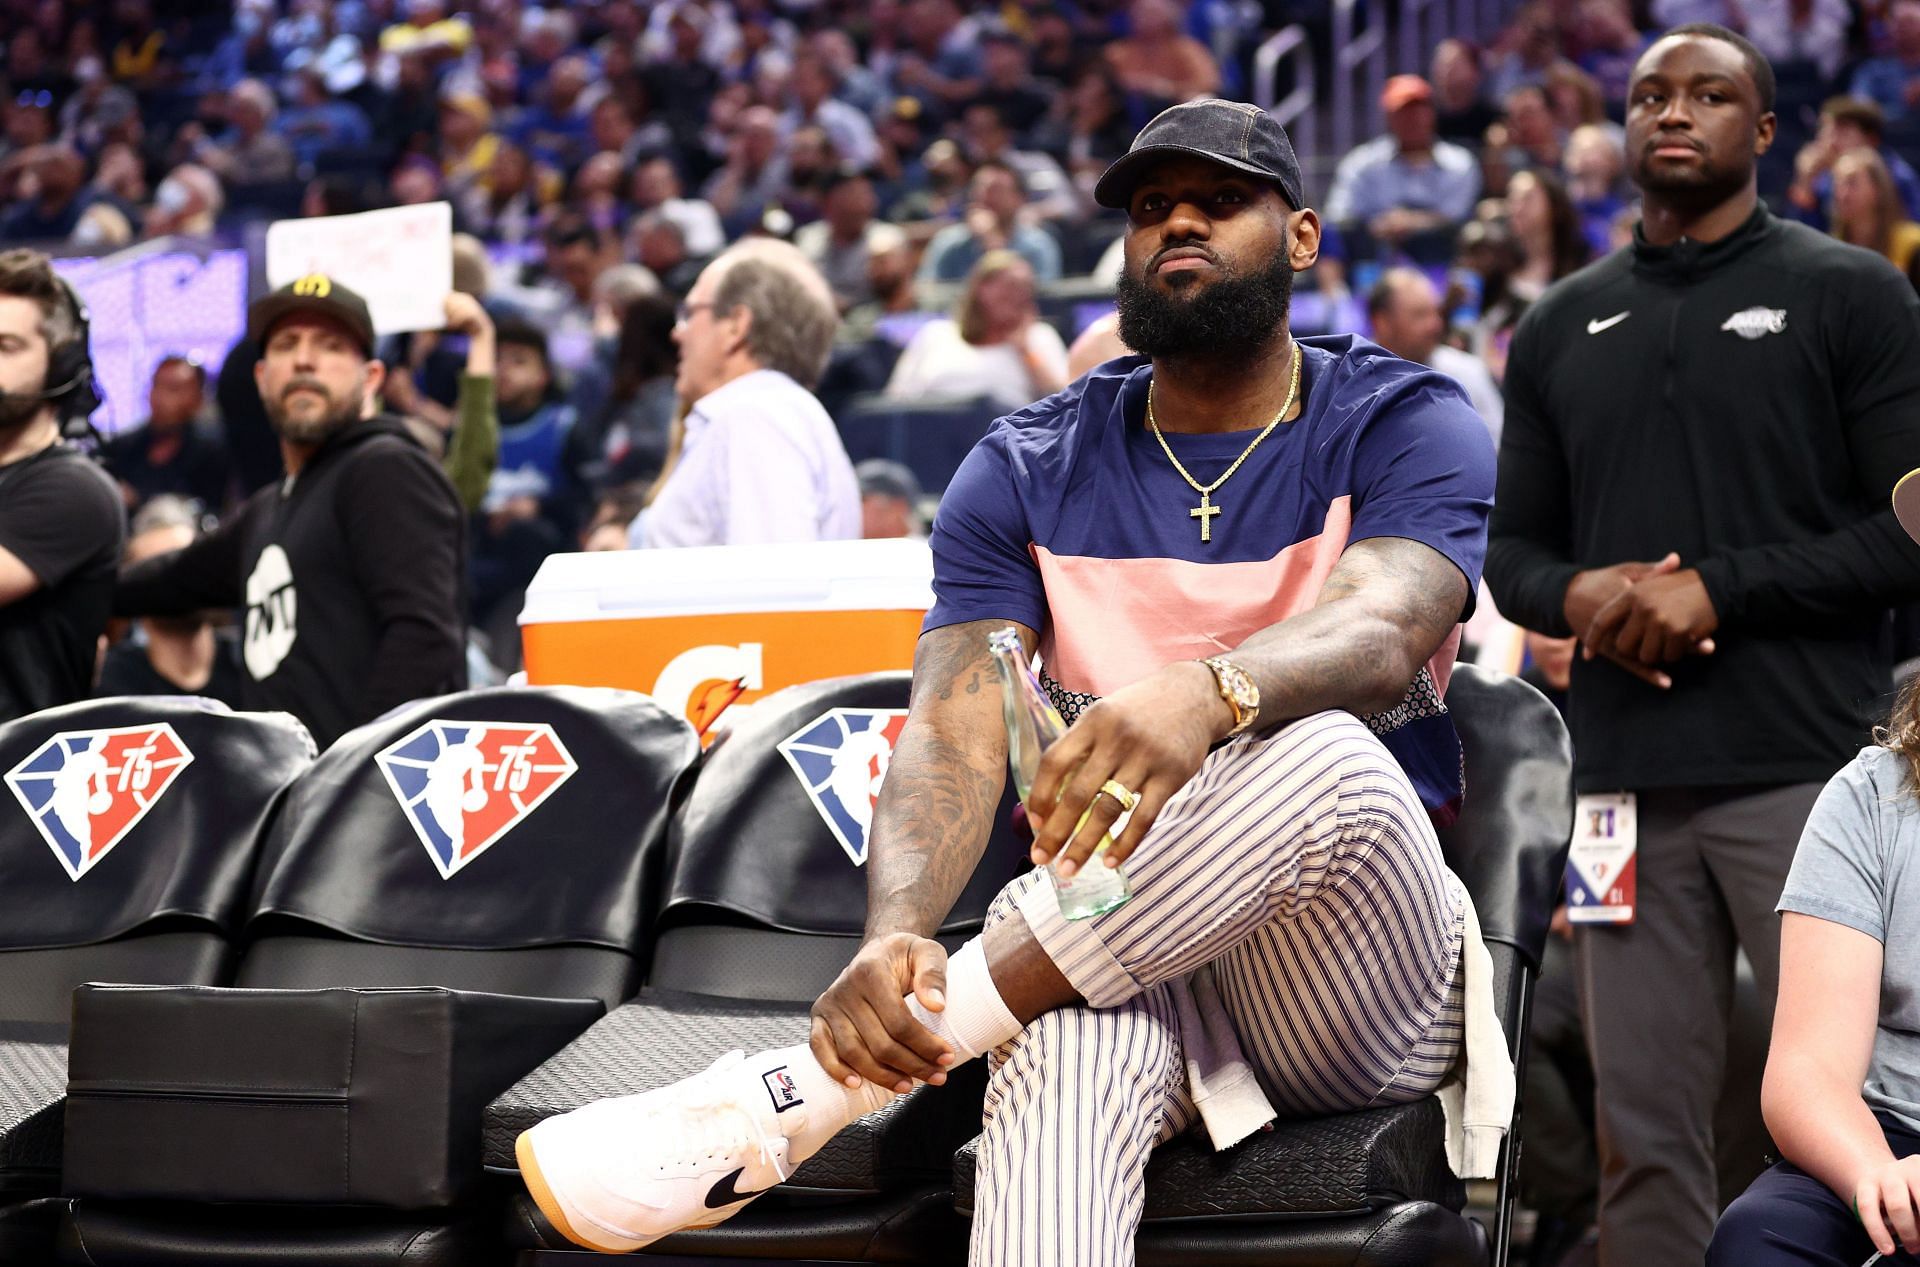 LA Lakers superstar LeBron James is now eligible for a contract extension